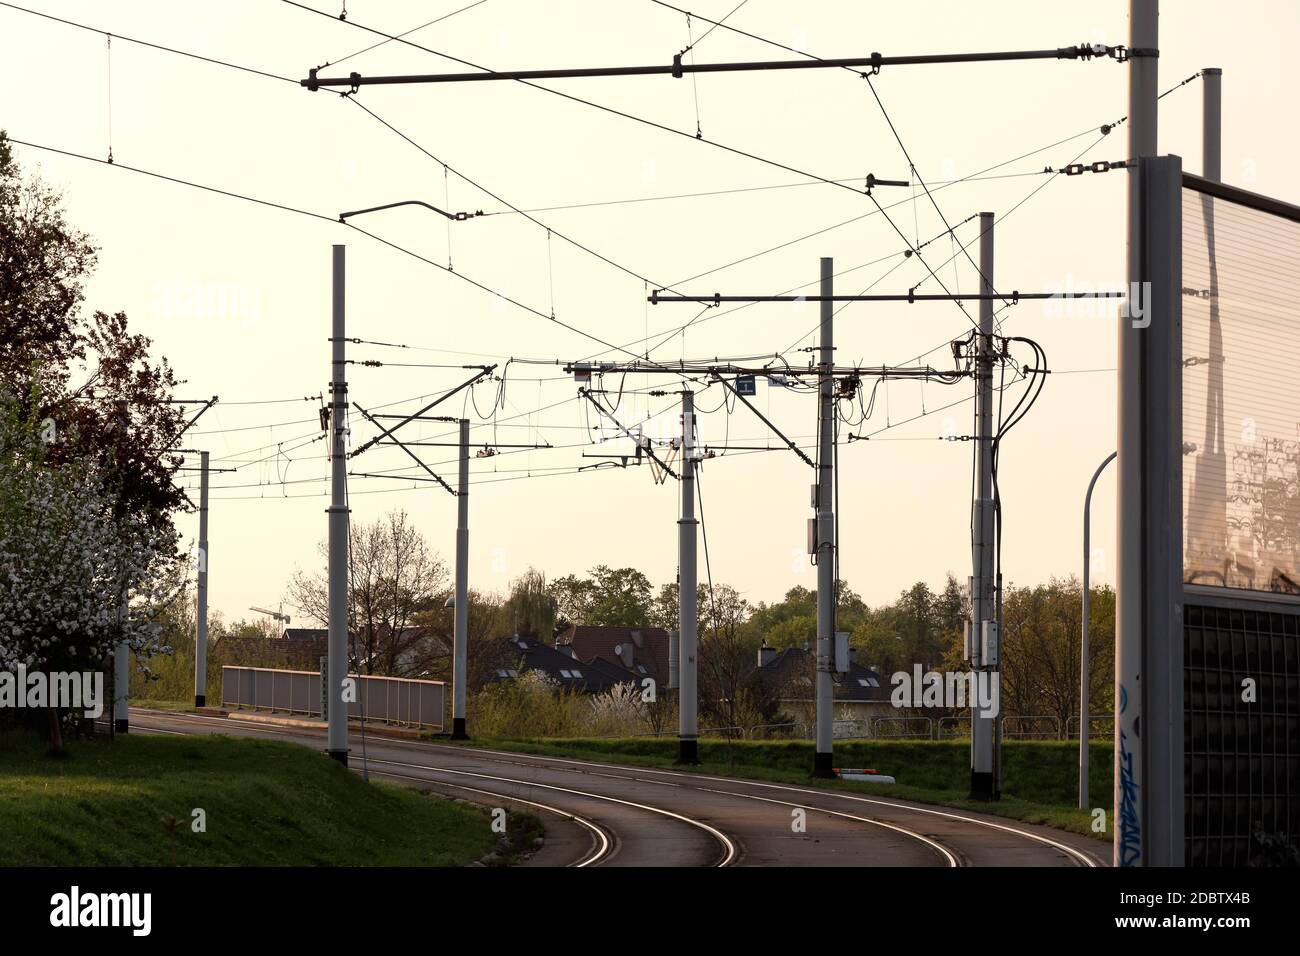 Tram rails and cables scenery. Tramway tracks and traction photo. Overhead electric wires and infrastructure Downtown str Stock - Alamy